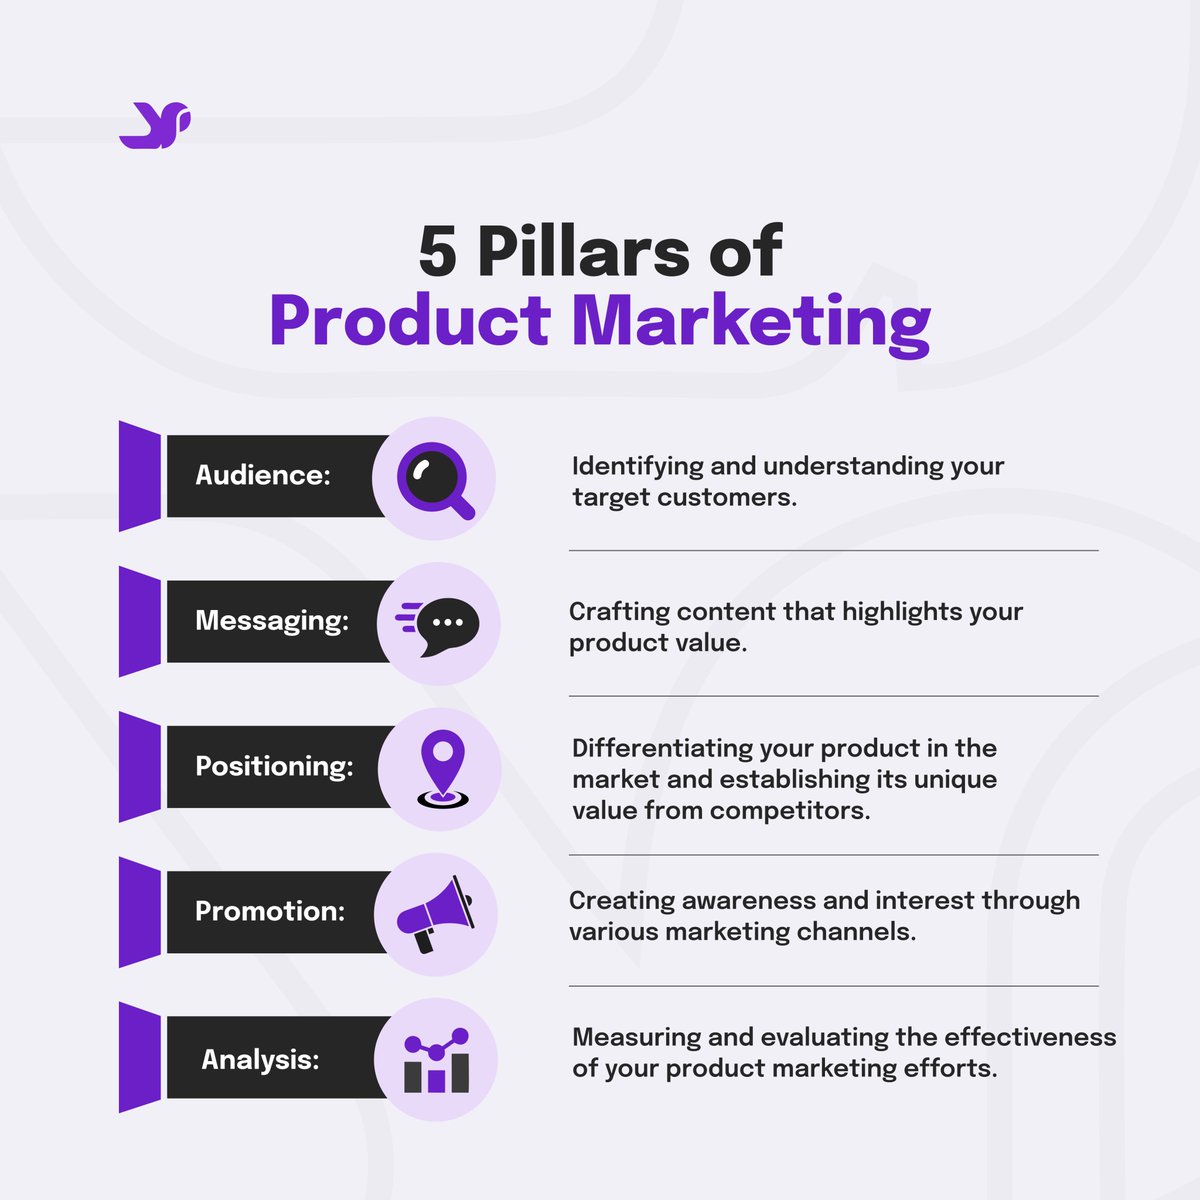 FIVE PILLARS TO BOOST YOUR BUSINESS PRODUCT
#PlugLinkNG #ProductMarketing